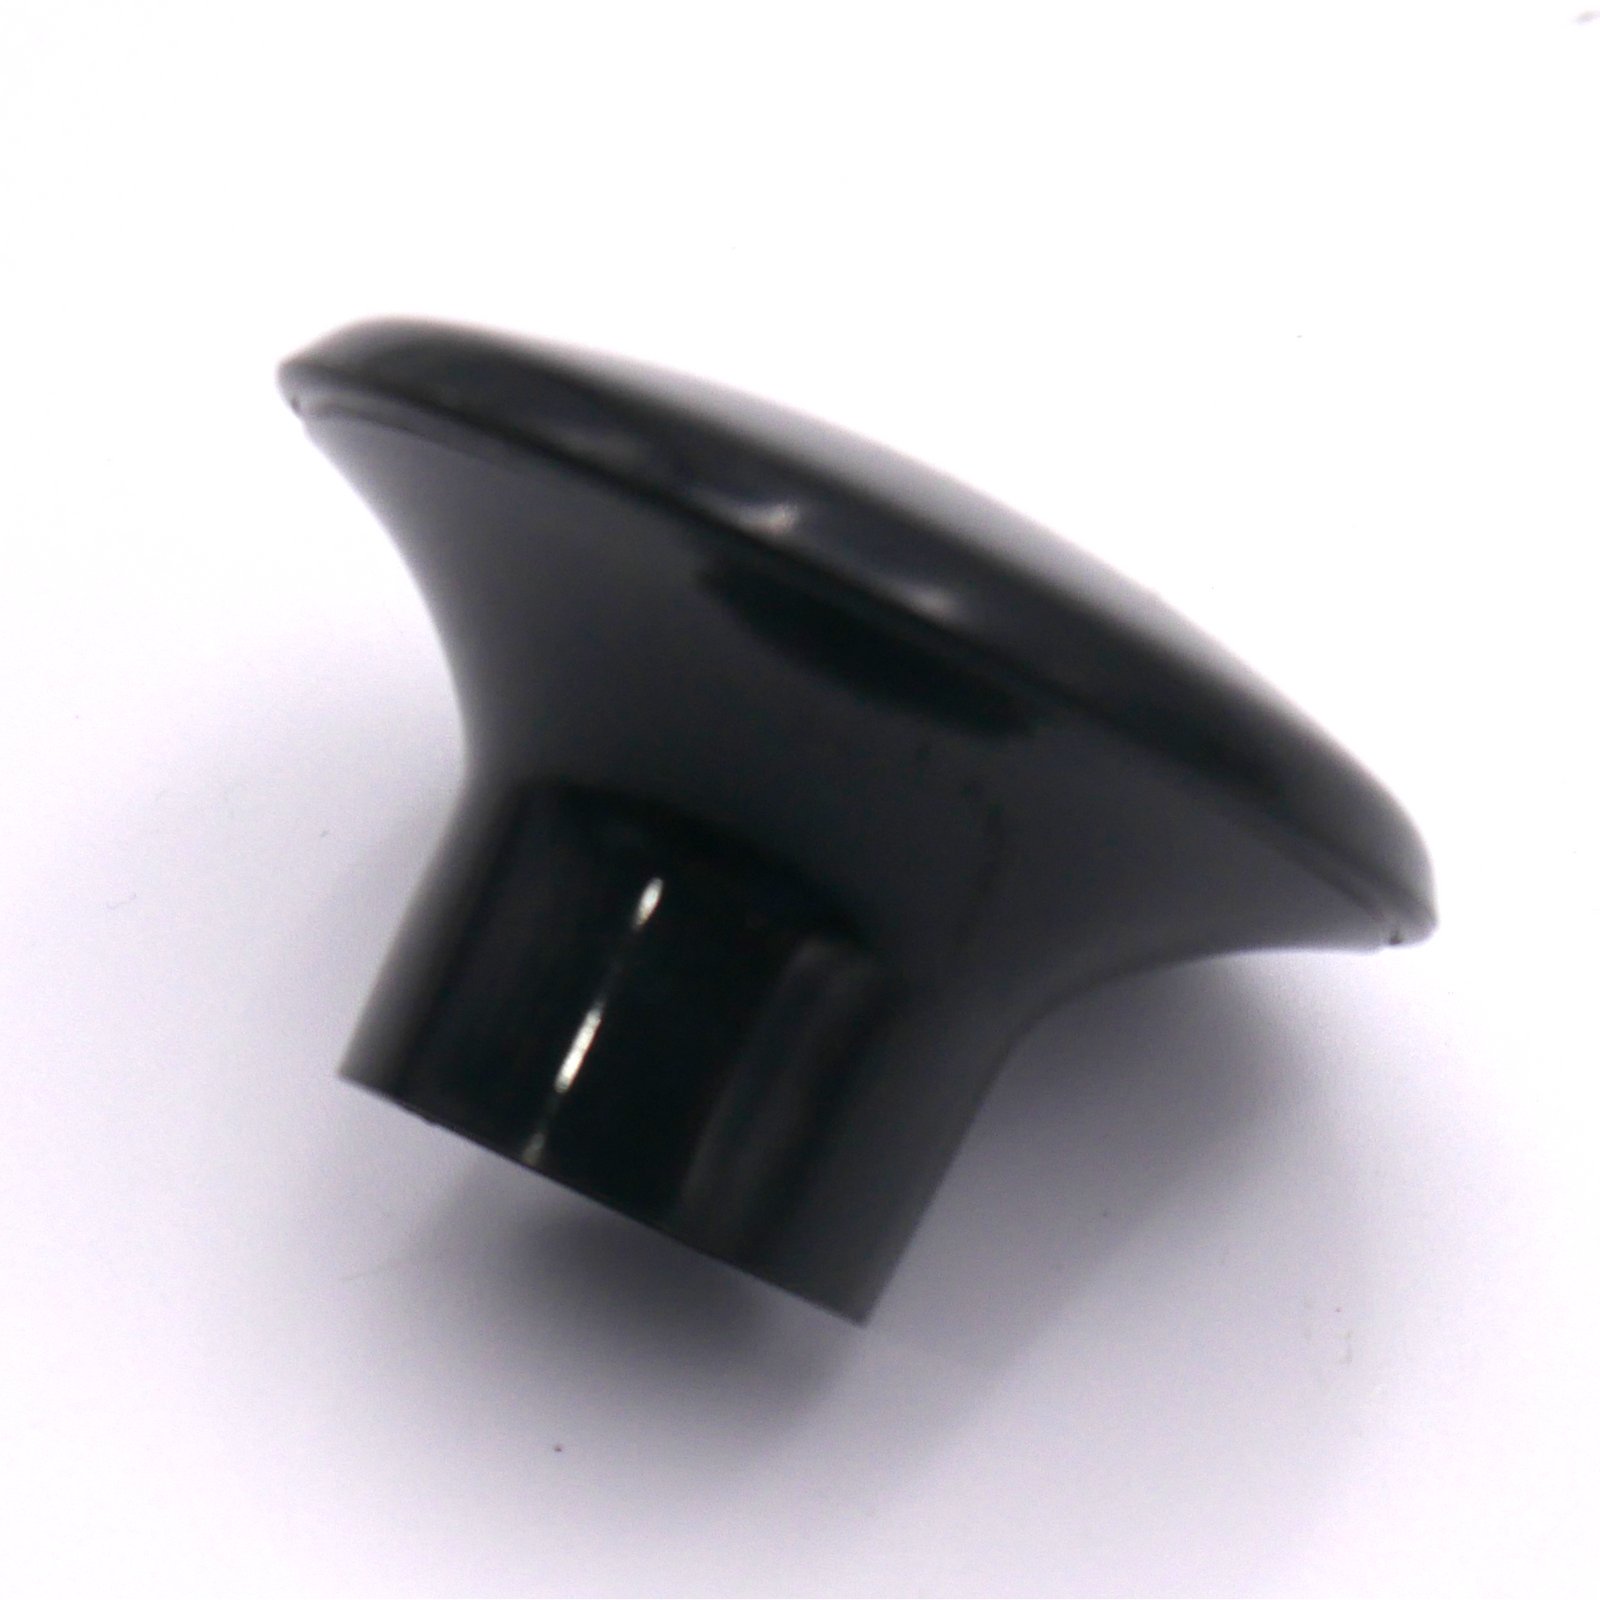 Plastic Handle Knob located on the upper arm of a n impulse bag sealing machine